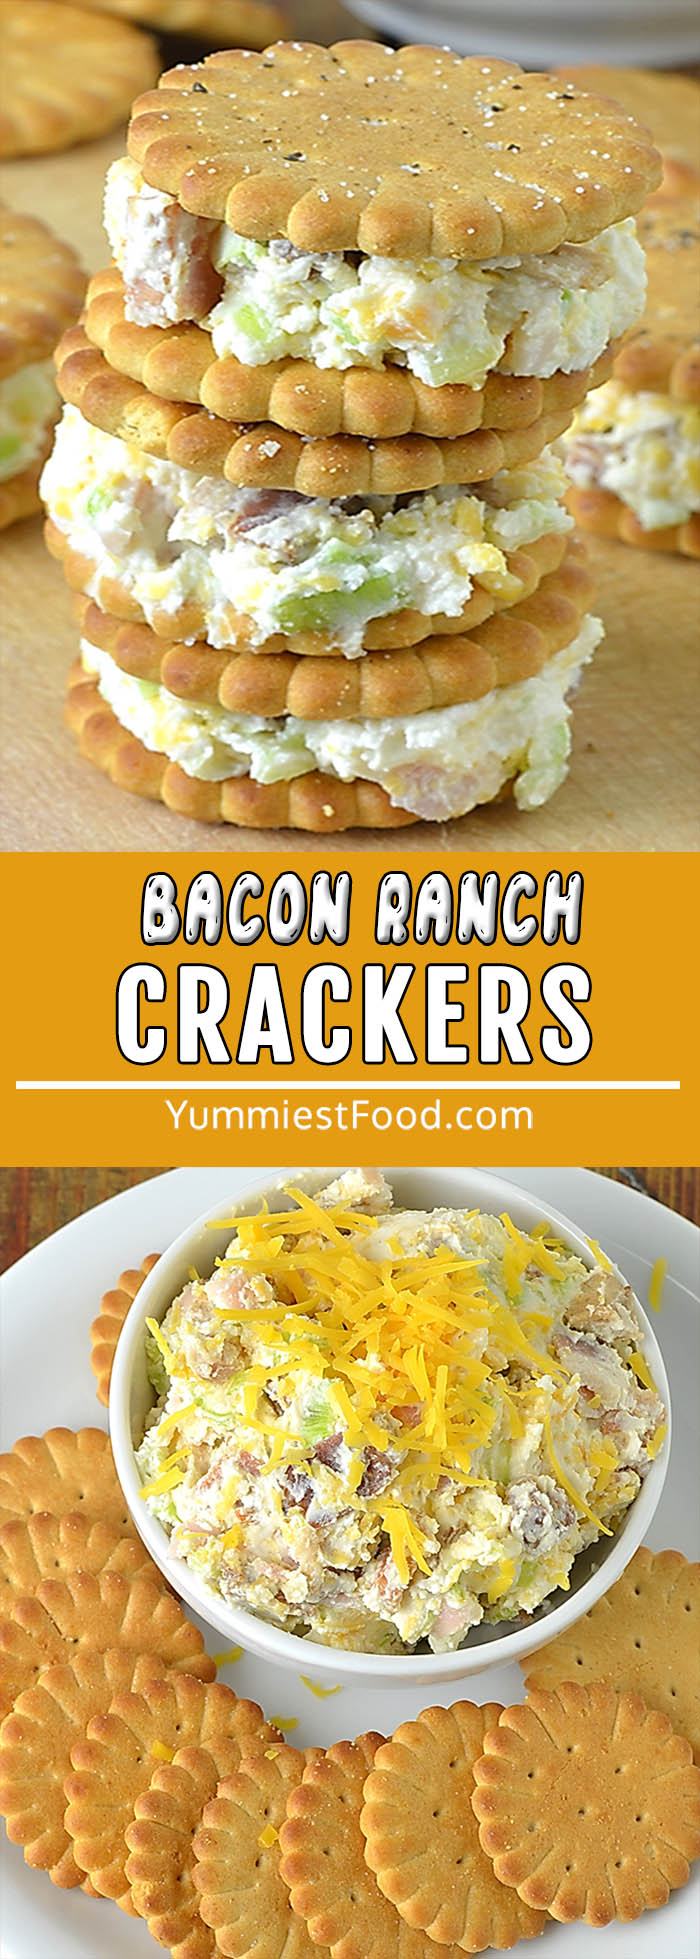 This classic Bacon Ranch Cheese Crackers recipe is made with crispy bacon, ranch seasoning, cream cheese, and cheddar. This make-ahead appetizer is a great way to feed a crowd! Easy snack to make, any time of the day!